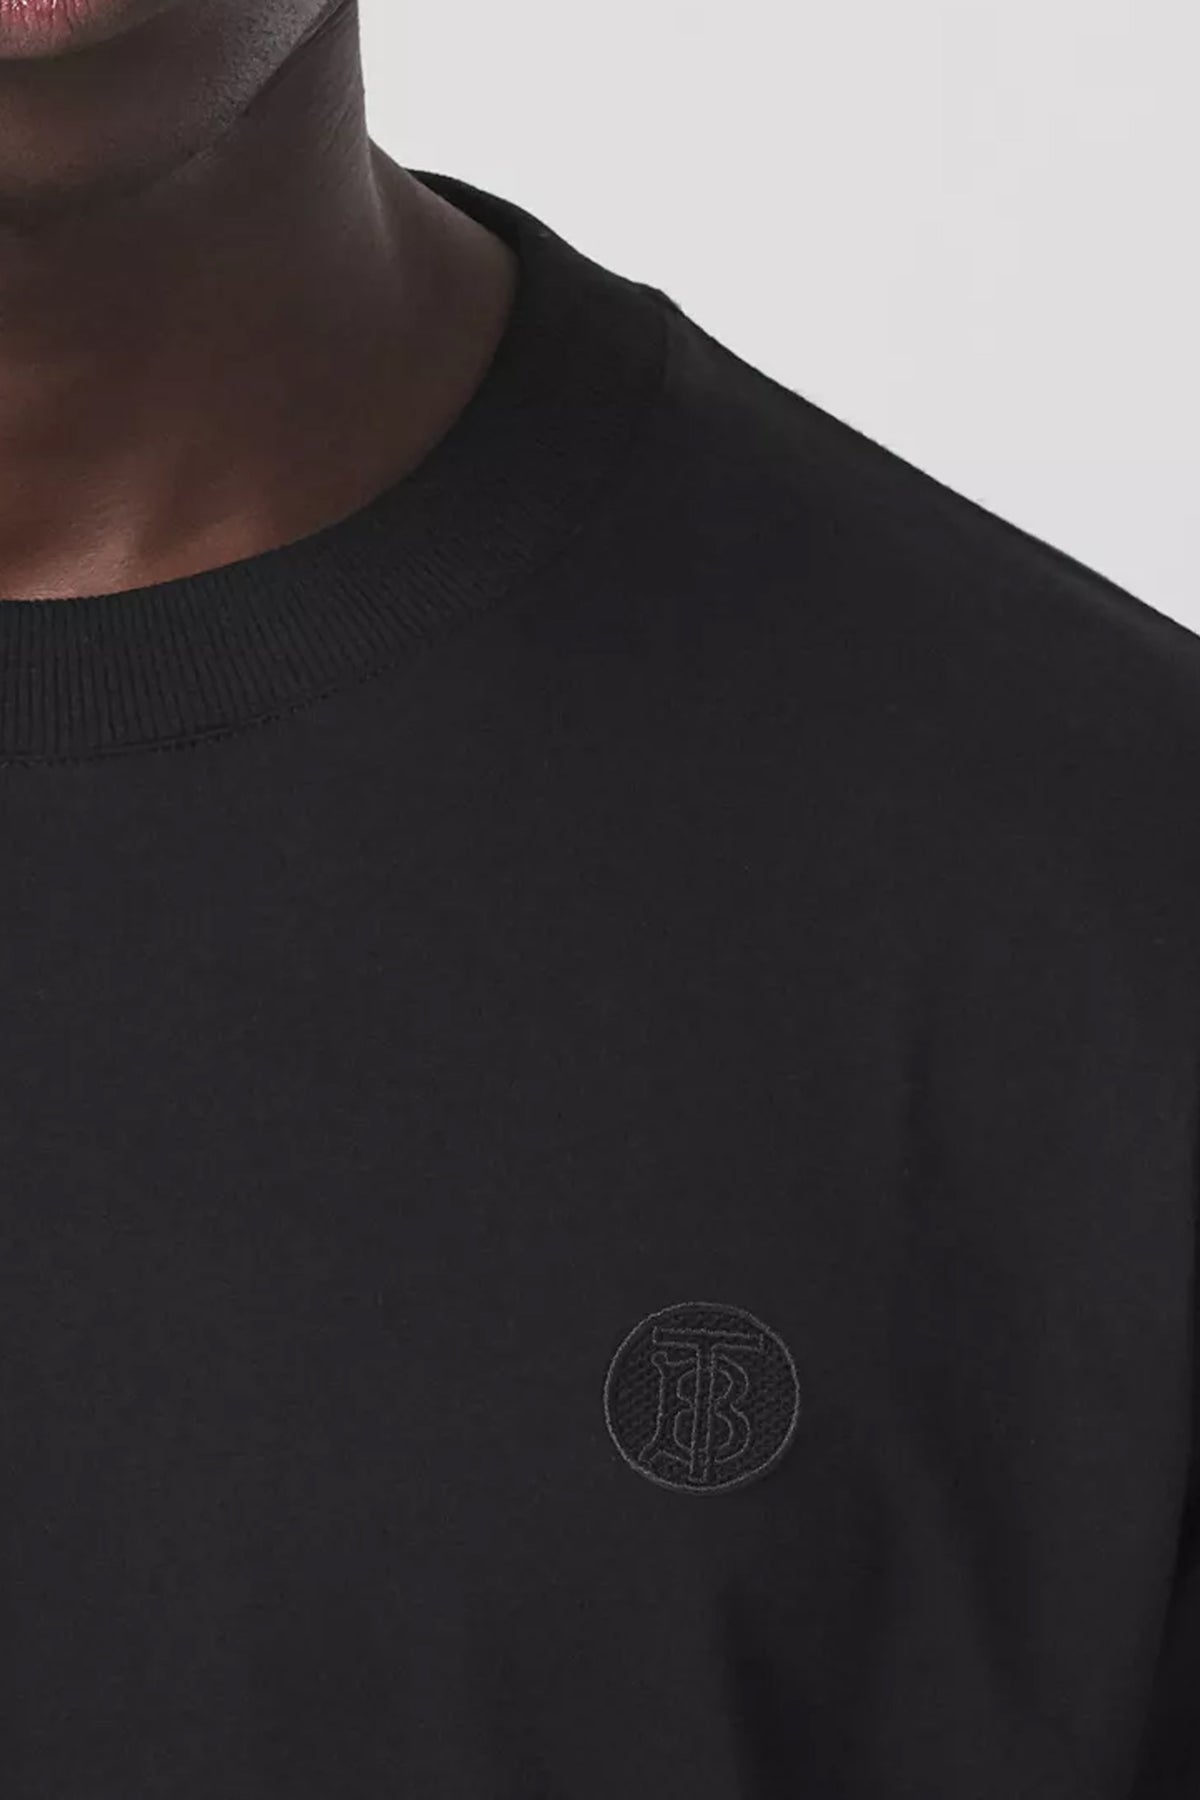 Burberry TB monogram embroidered T-shirt